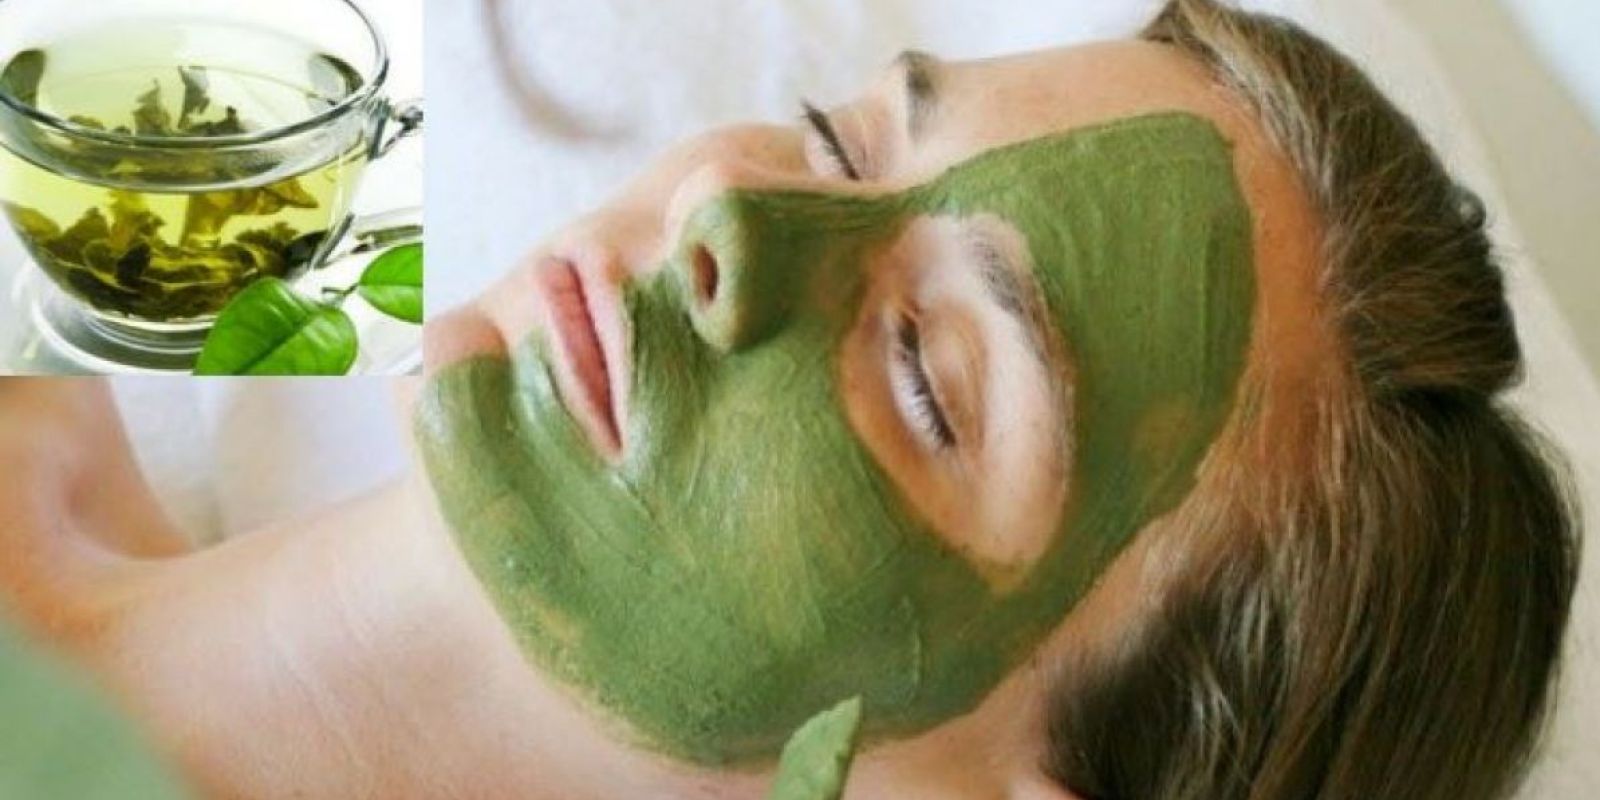 How To Use Matcha Green Tea For Skin & Hair Care admin ajax.php?action=kernel&p=image&src=%7B%22file%22%3A%22wp content%2Fuploads%2F2020%2F12%2Fpurcorganics Matcha Green Tea For Skin